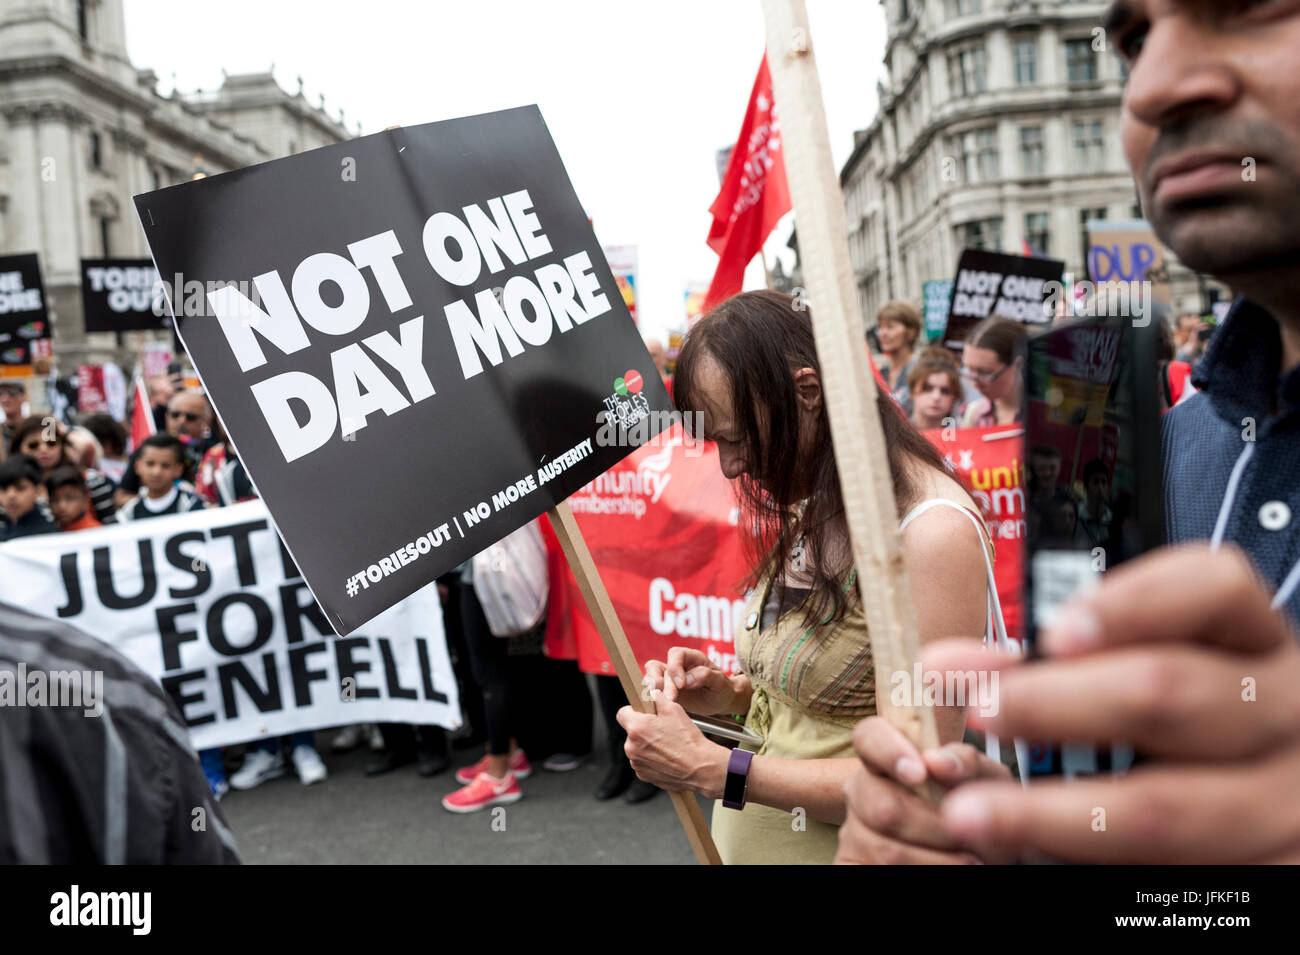 London, UK. 01st July, 2017. LONDON, ENGLAND - JULY 01 Demonstrators for Grenfell Tower joined the 'Not One Day More' rally in Parliement square. Thousands of protesters joined the anti-Tory demonstration at BBC Broadcasting House and marched to Parliament Square. The demonstrators were calling for an end to the Conservative Government and policies of austerity Credit: onebluelight.com/Alamy Live News Credit: onebluelight.com/Alamy Live News Stock Photo